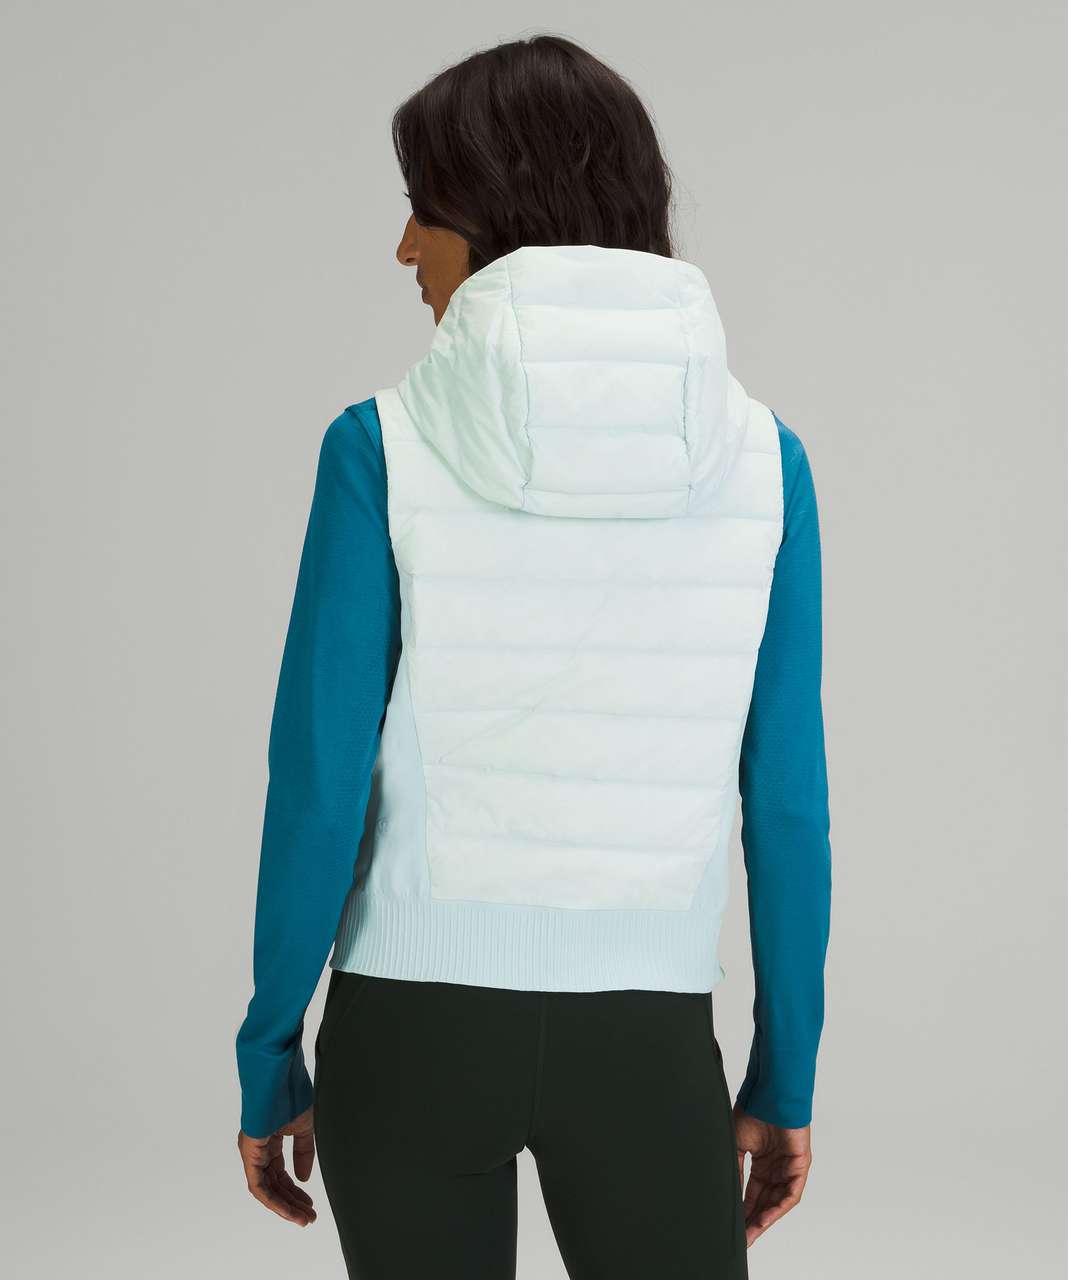 Lululemon Down and Around Vest - Delicate Mint